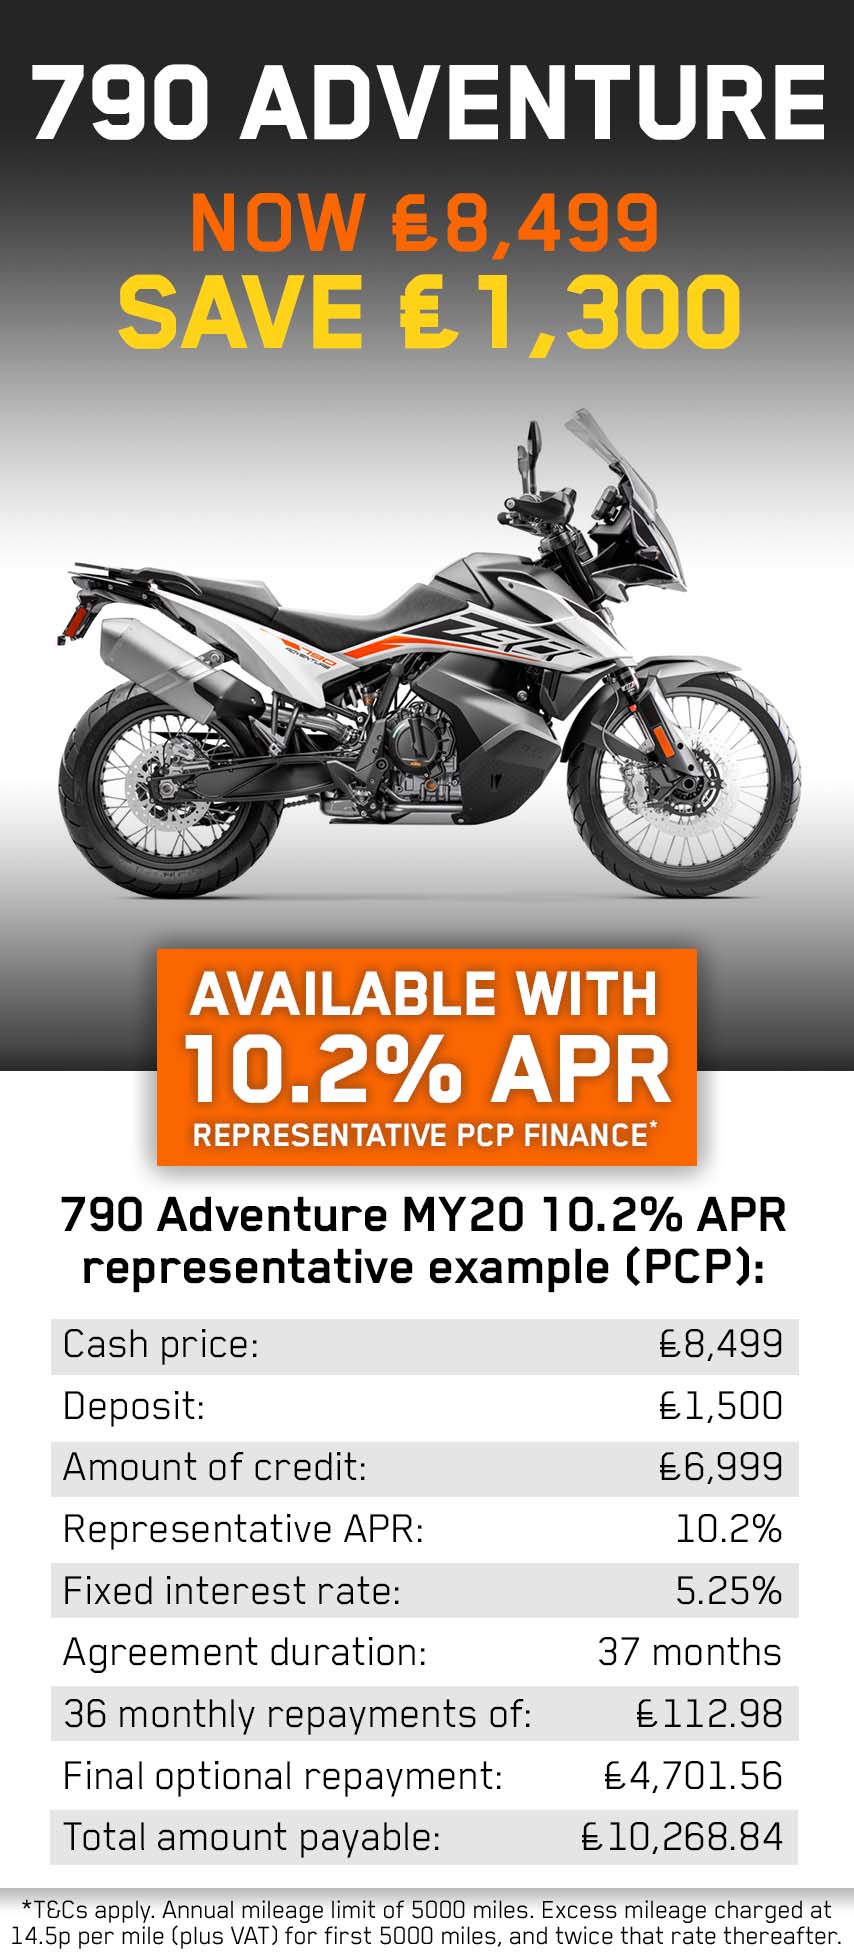 Exclsuively at Laguna new offer available on the KTM 790 Adventure